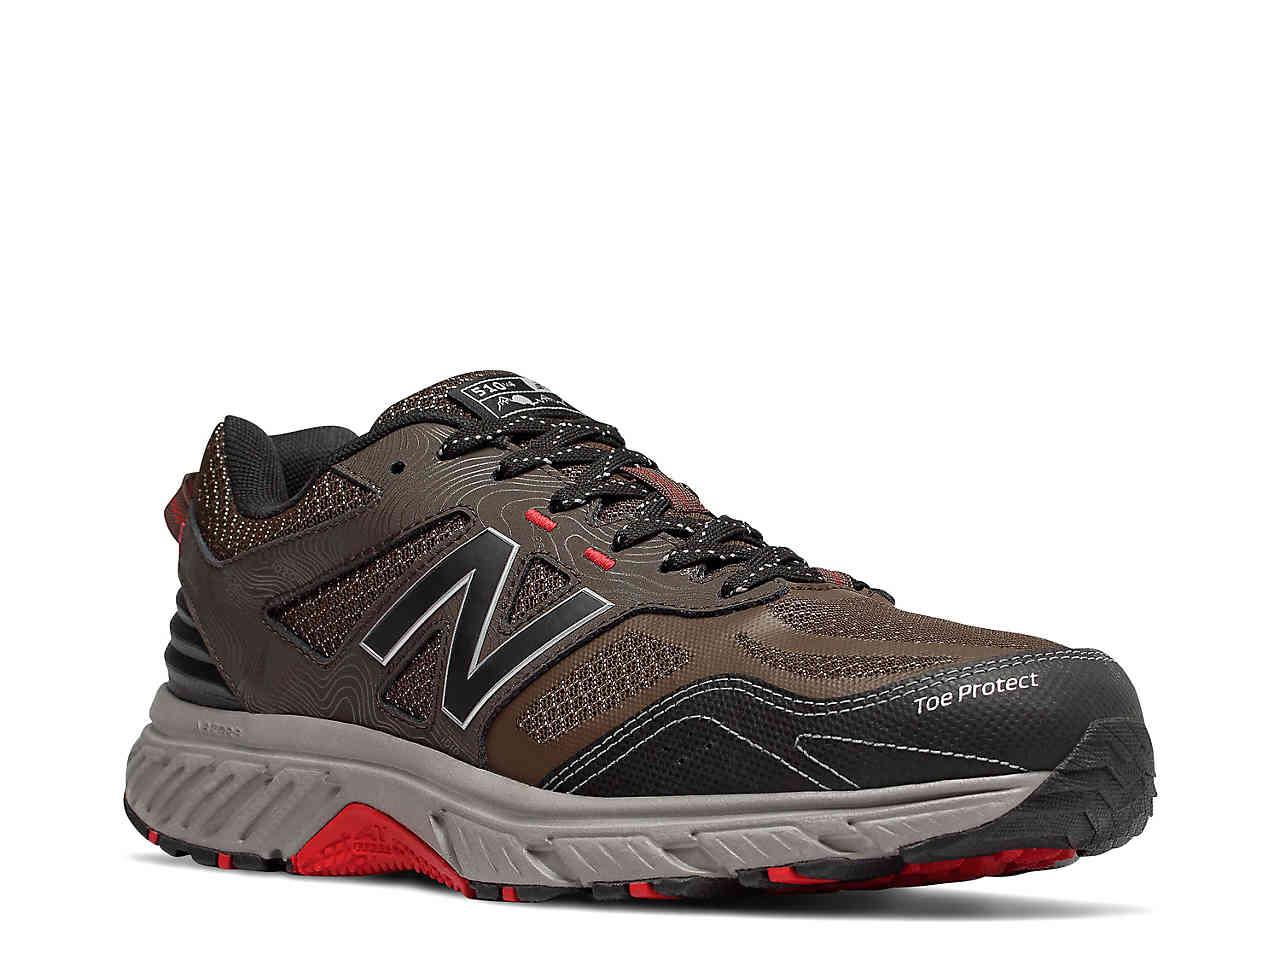 New Balance Synthetic 510 V4 Trail Running Shoe in Dark Brown (Brown ...